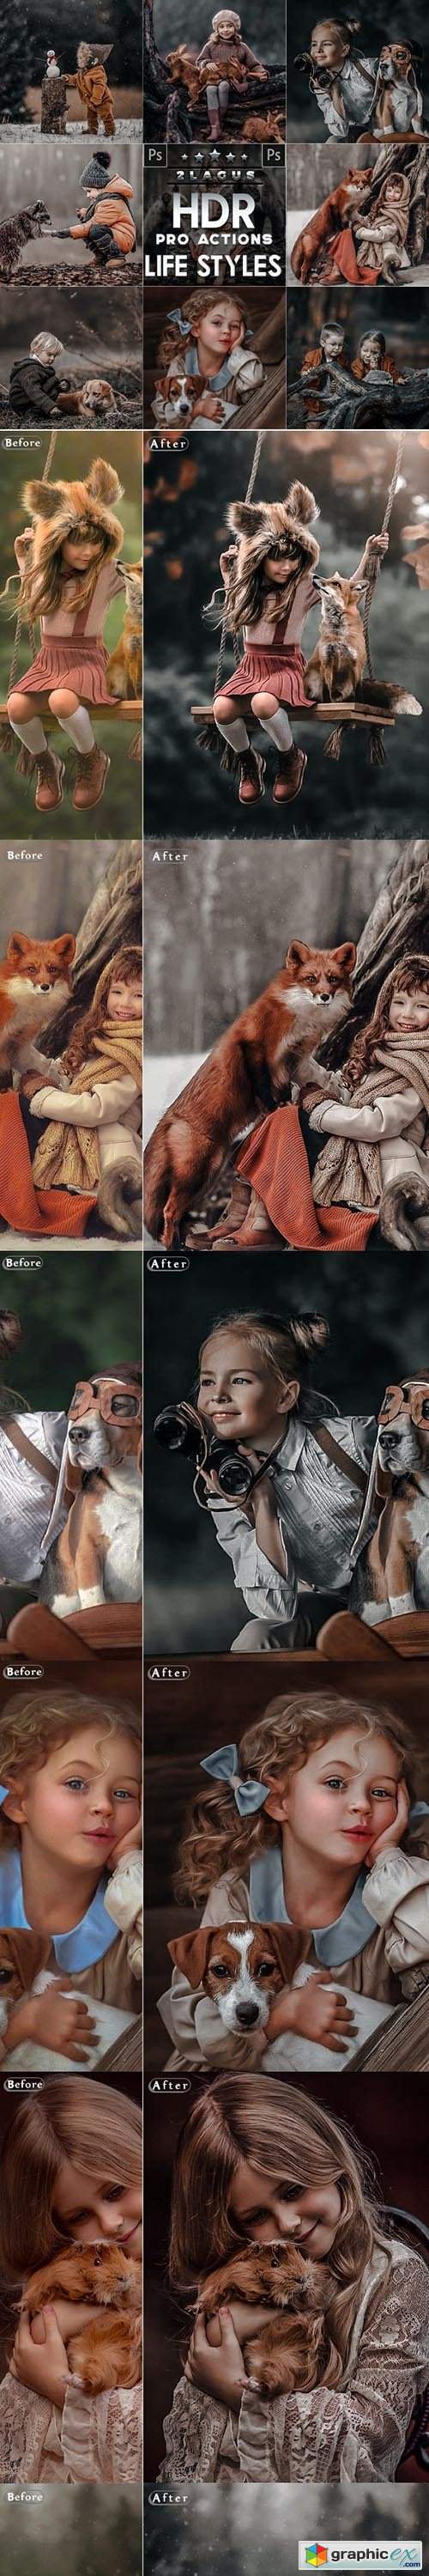 PRO HDR Photoshop Actions 26629578